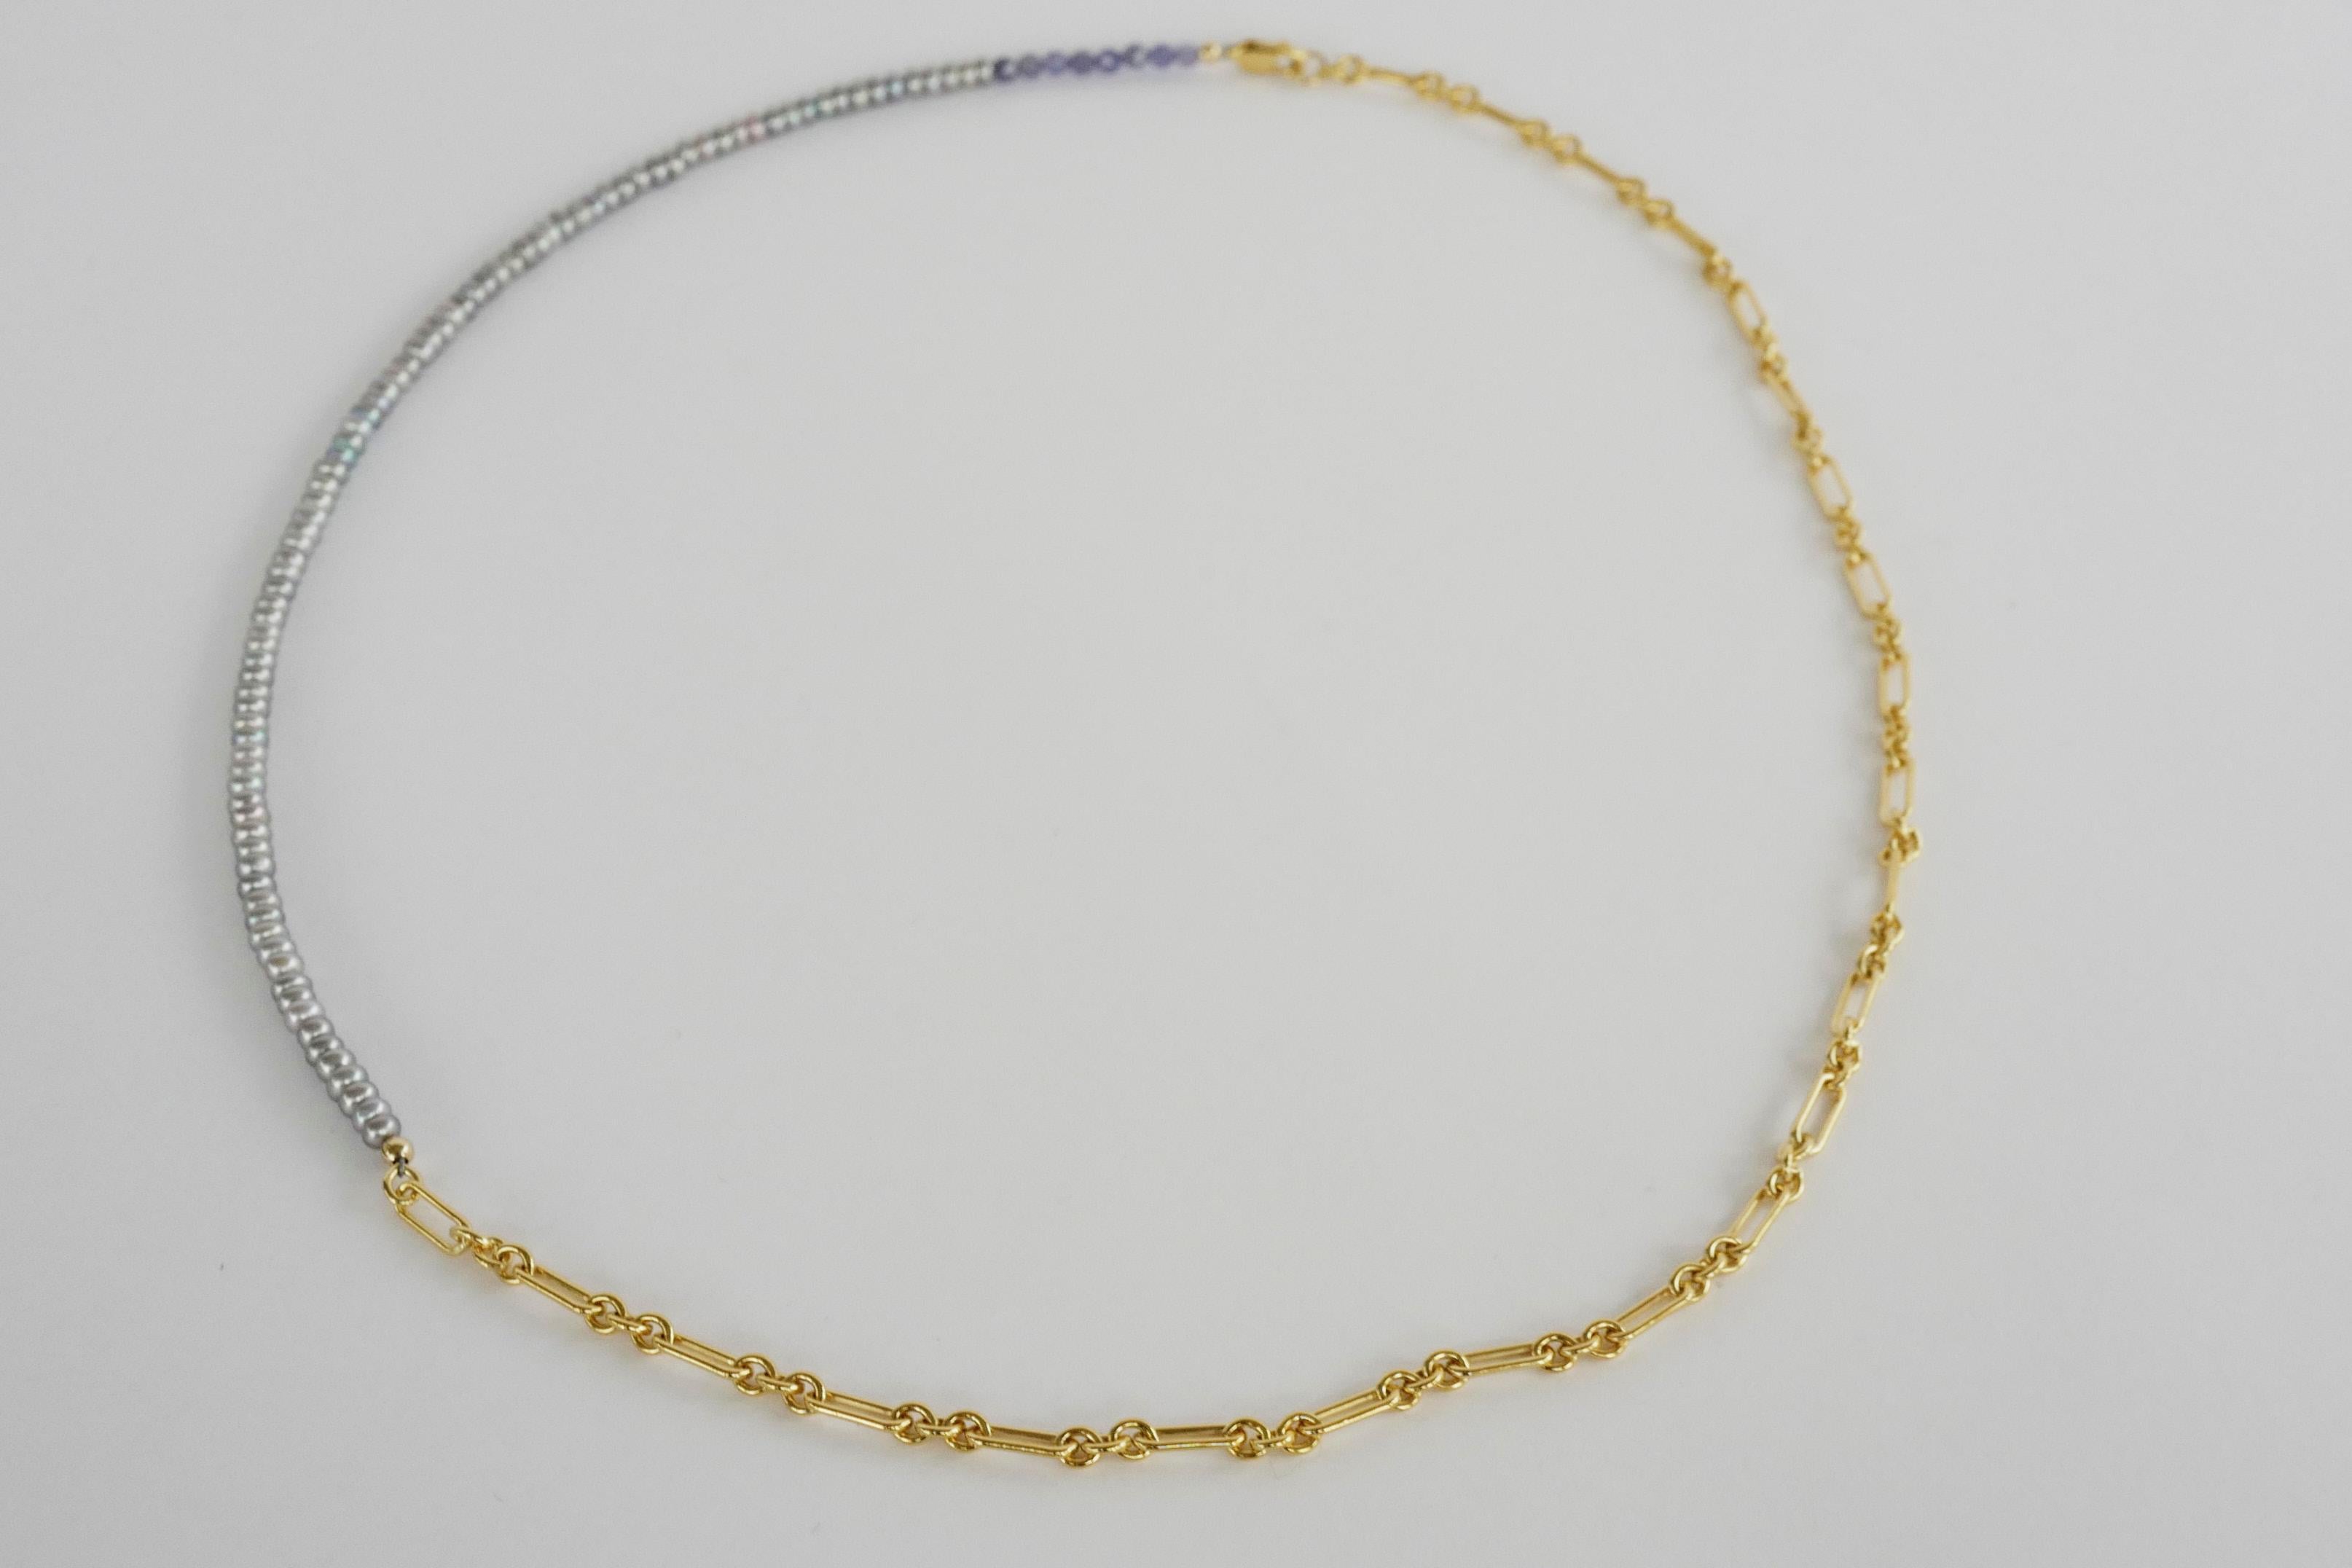 Women's Tanzanite Silver Pearl Beaded Choker Gold Filled Chain Necklace J Dauphin